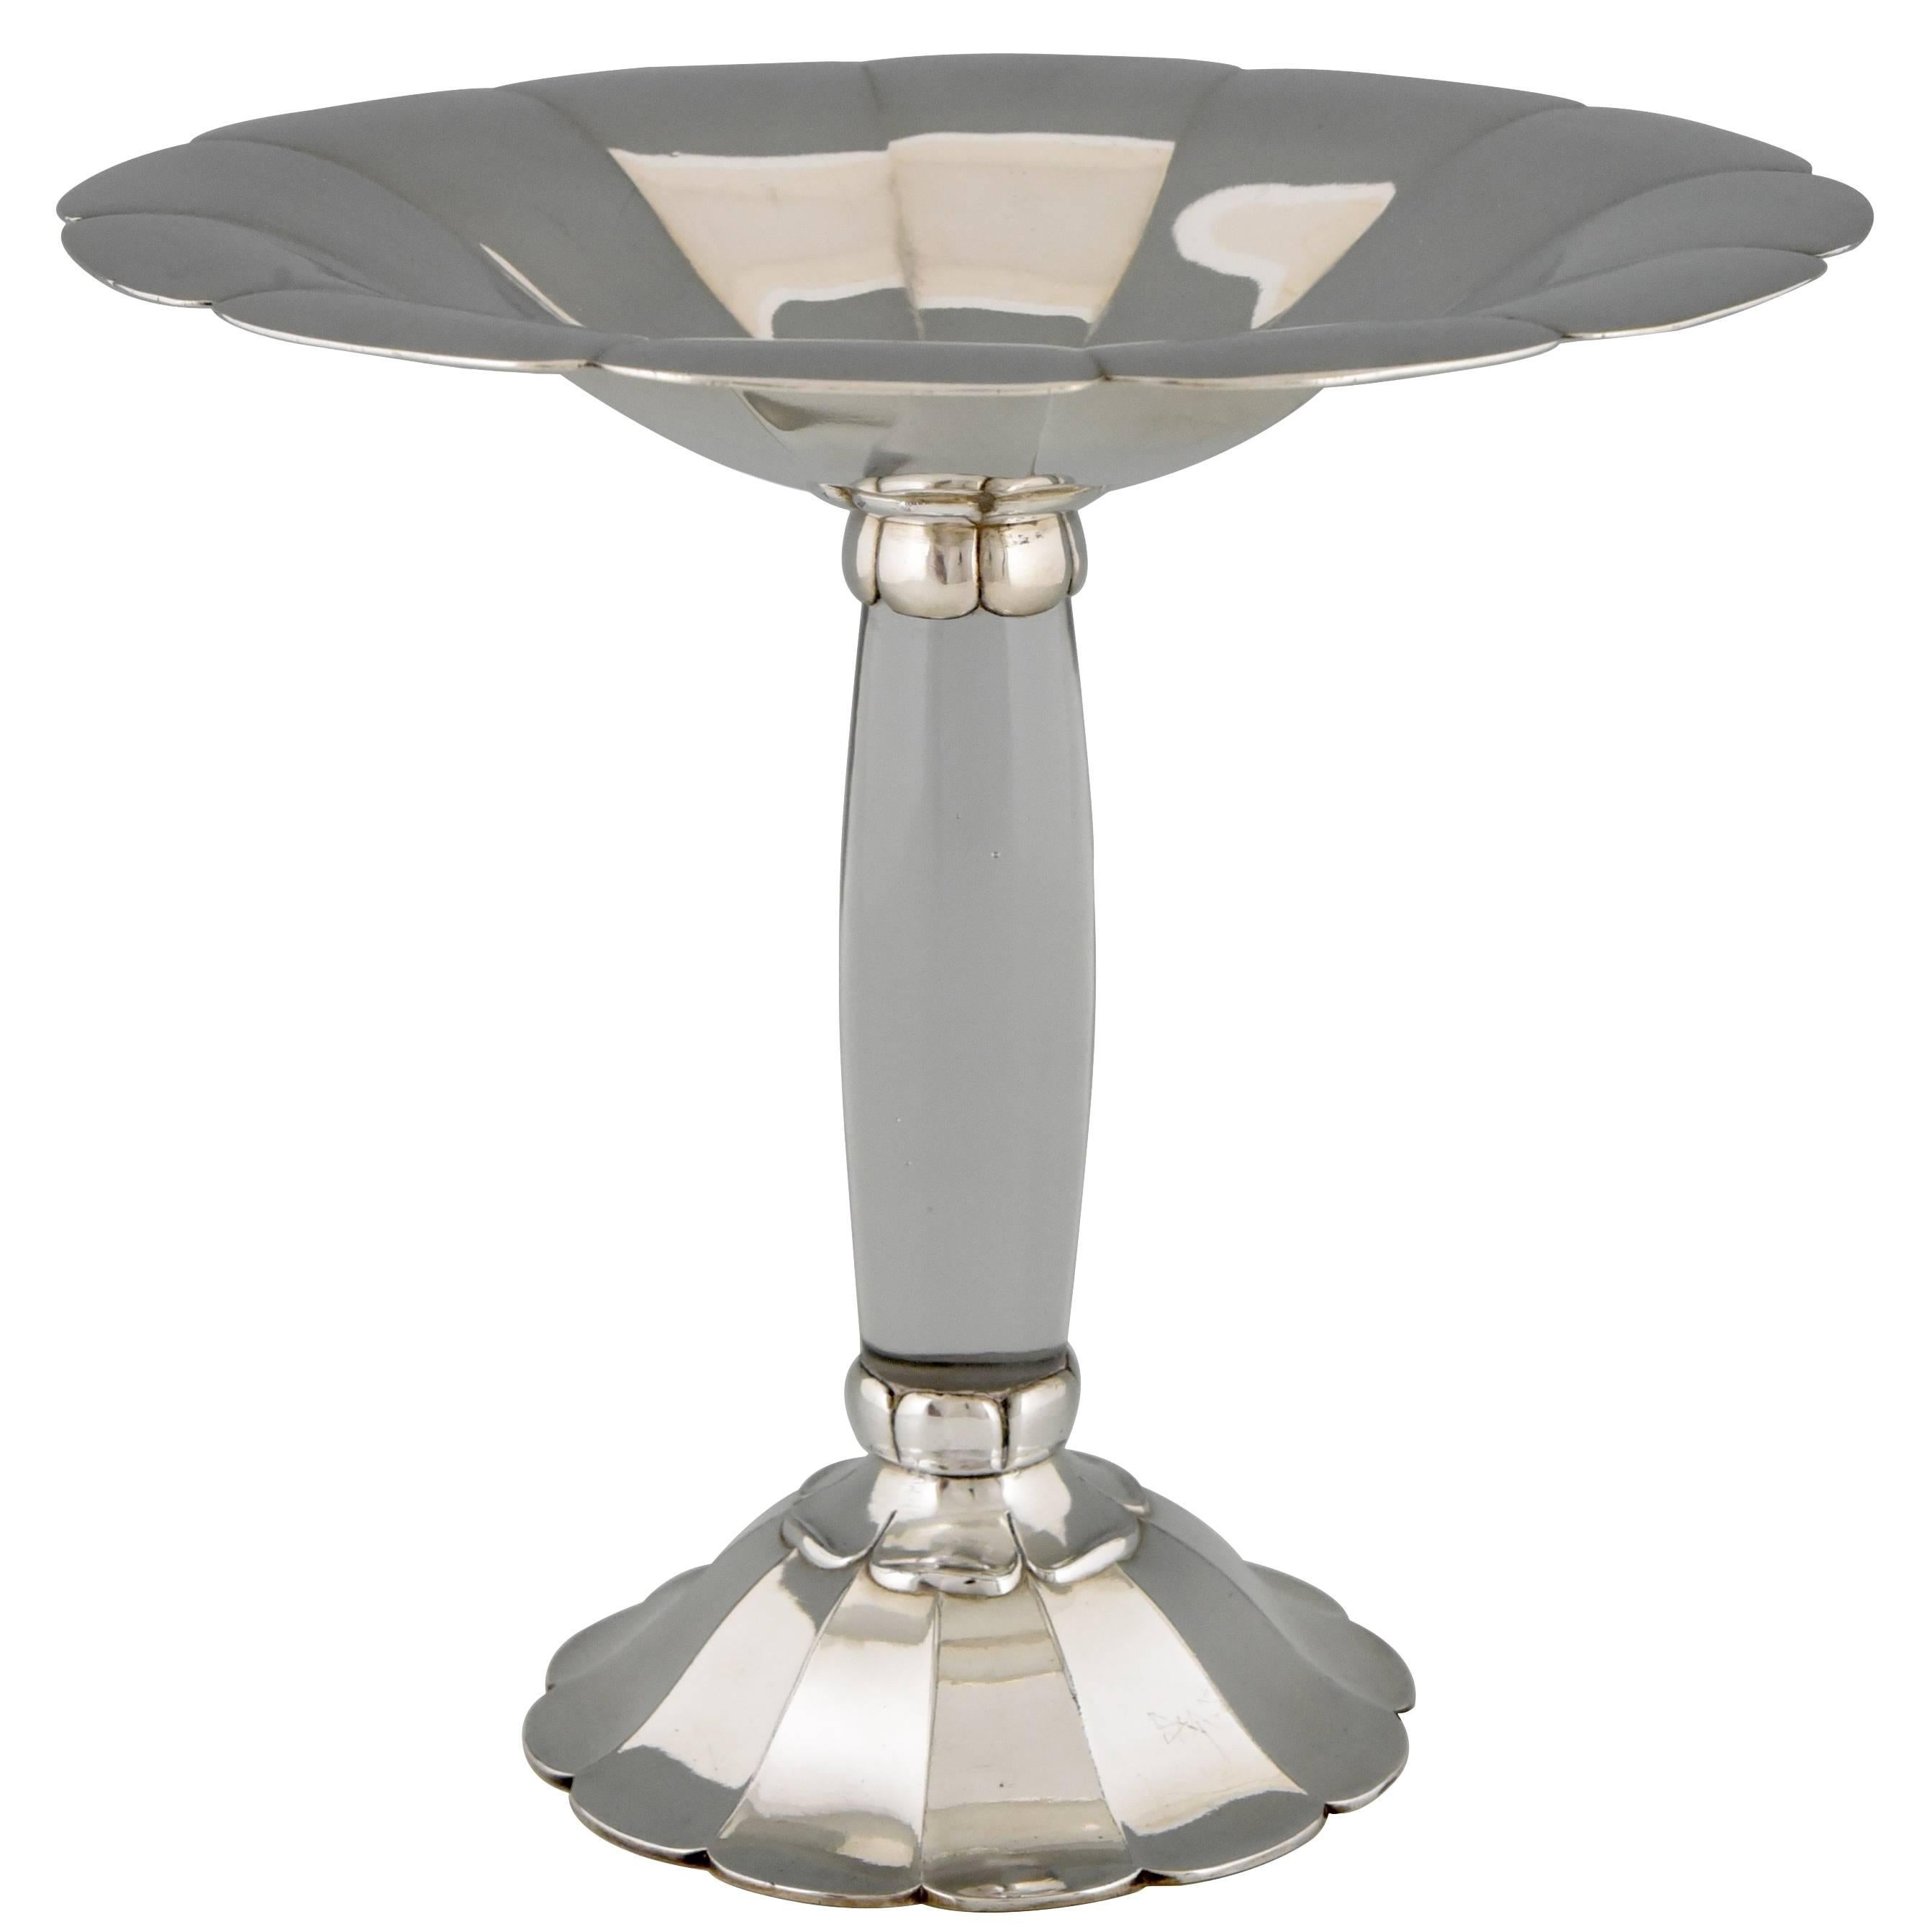 Art Deco Silvered Fruitstand Or Centerpiece By Gallia Christofle 1930 France